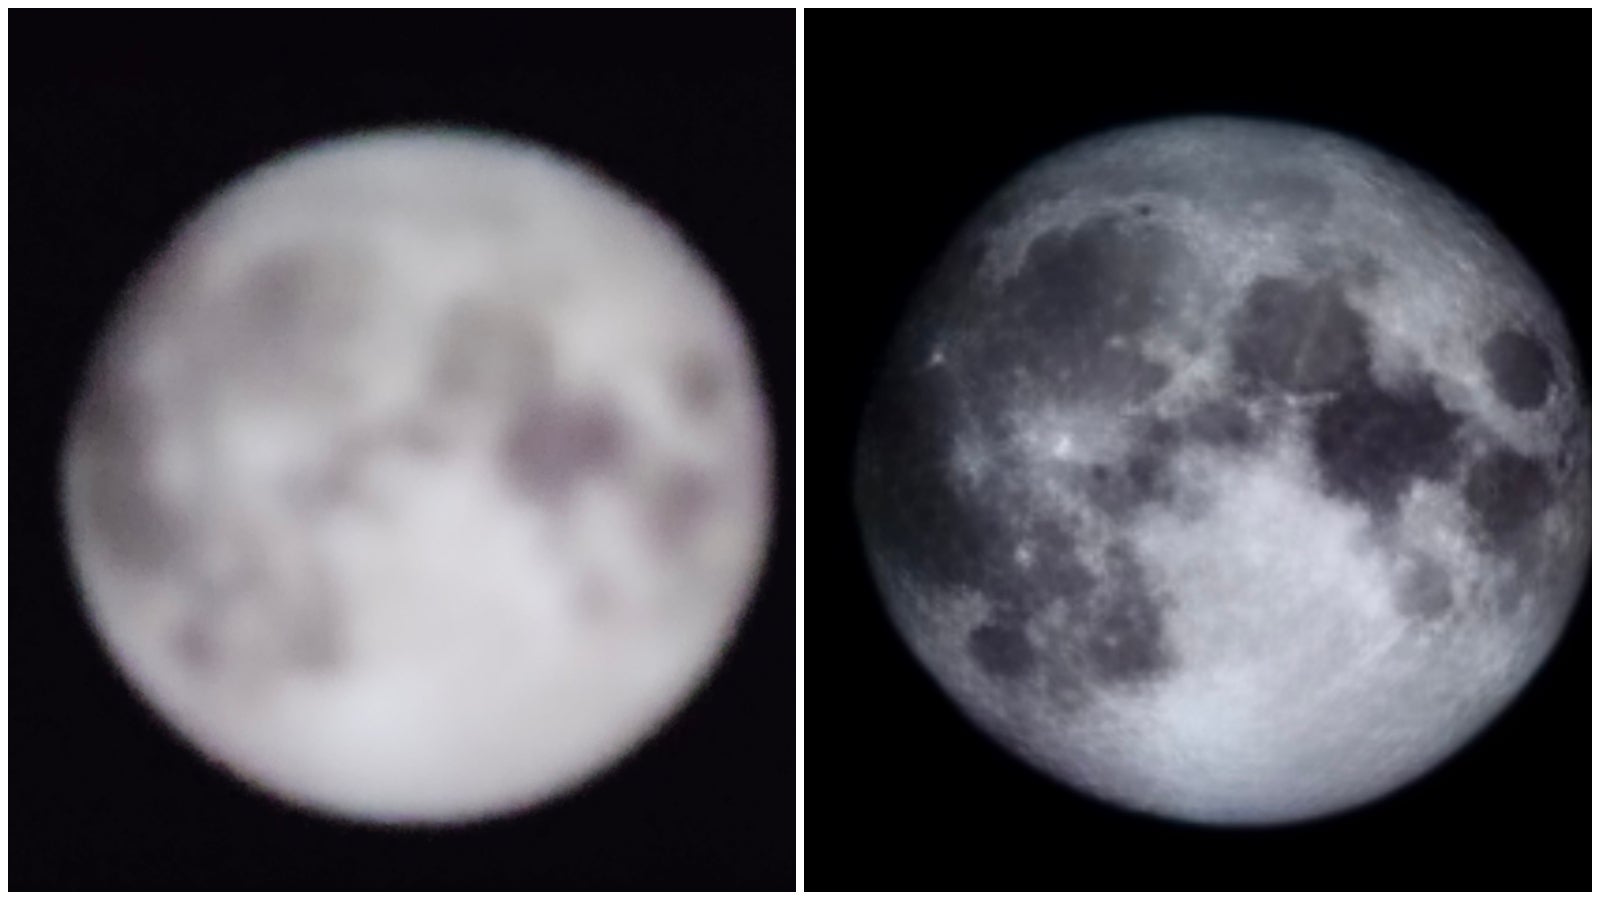 On the right is the very same blurry image of the moon as displayed on my MacBook screen; on the left is what the Galaxy S23 Ultra managed to capture when I moved farther back and took a photo beyond 25x zoom - I think it was 50x. - Yes, your moon photos are sort of “fake” but nothing to apologize for (Samsung breaks silence)